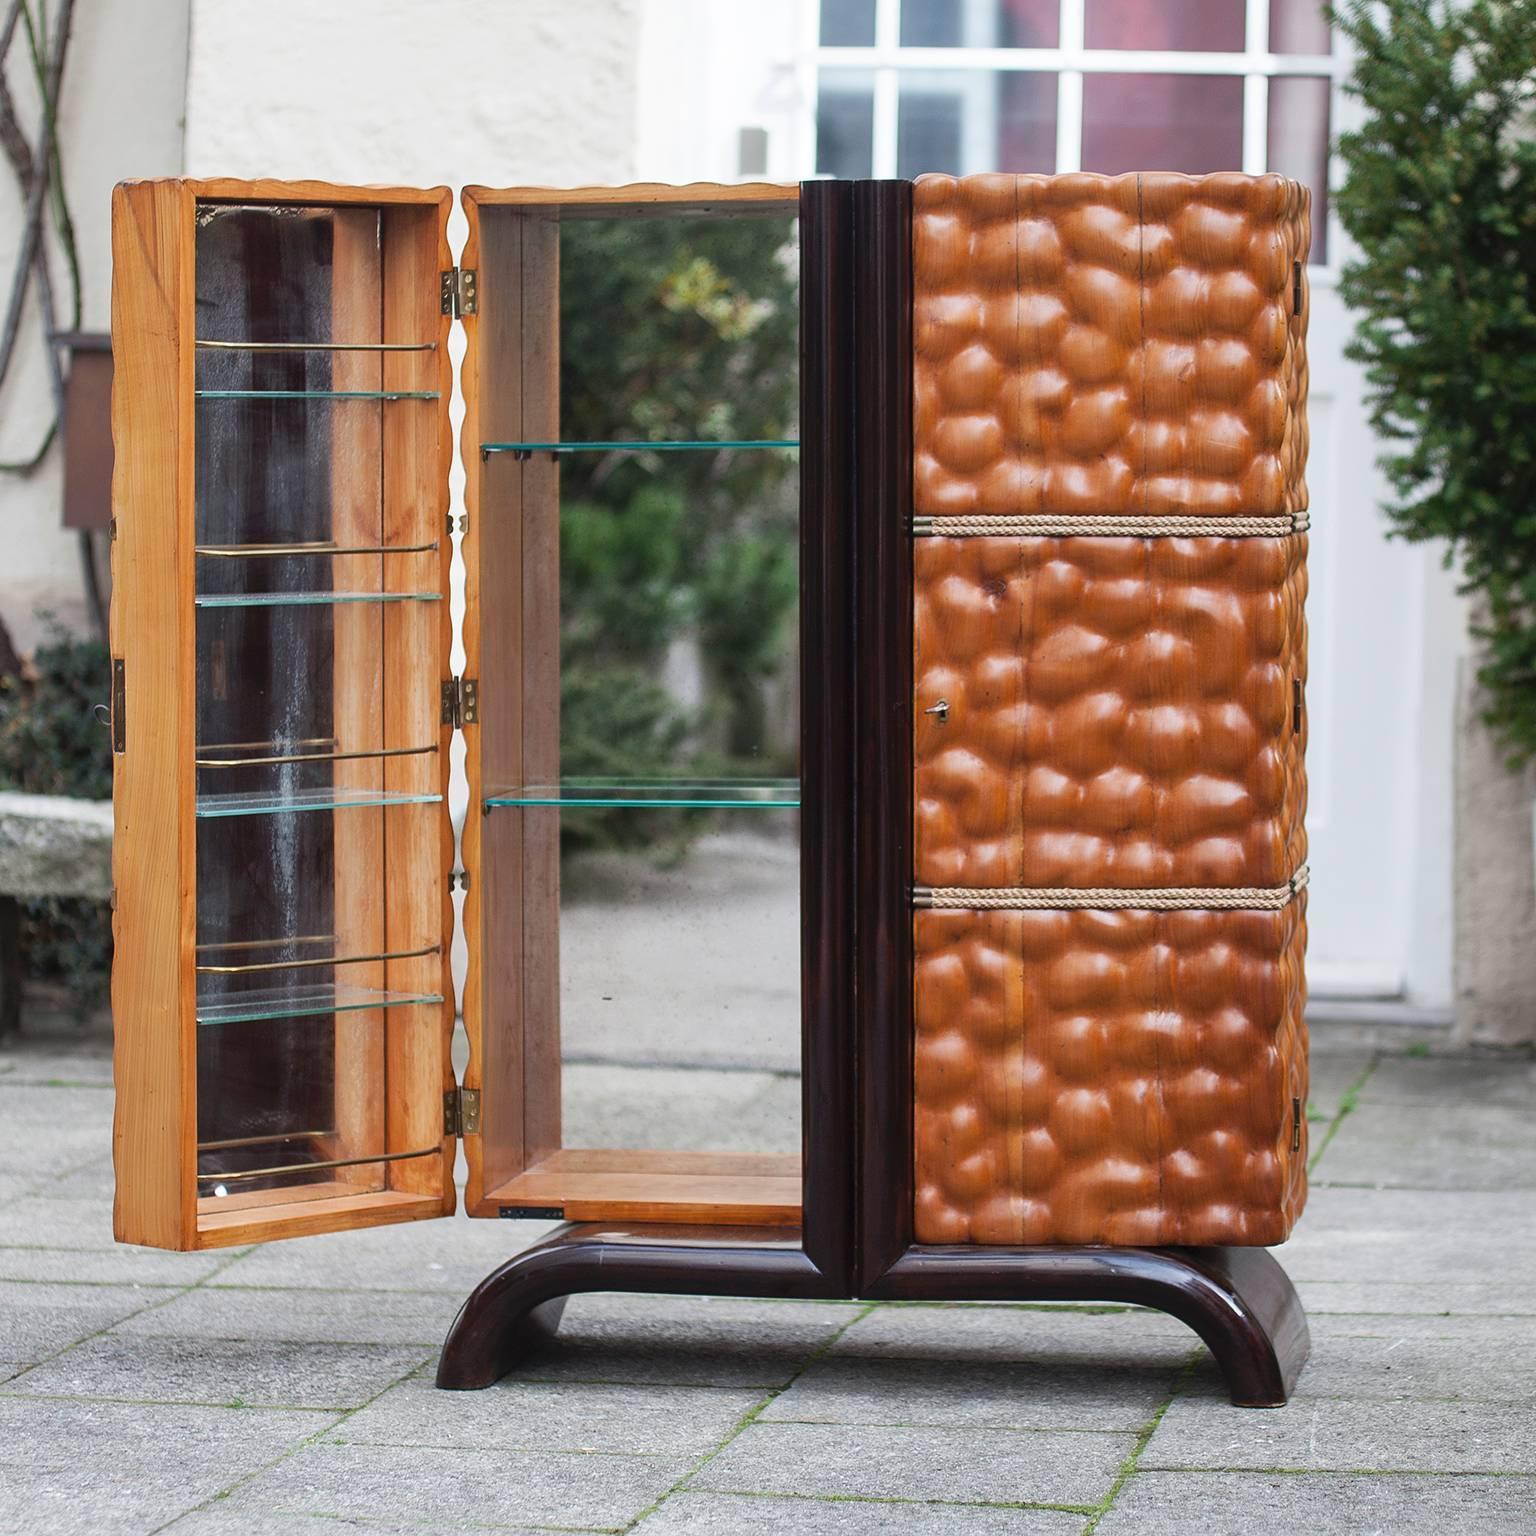 A rare and early cocktail cabinet, designed by and manufactured by Aldo Tura.
Italy, circa 1940, carved cherry, dark stained cherry, polished, decorated with bands of twisted rope, mirrored interior, brass rods, glass shelves, lighting, with a key.